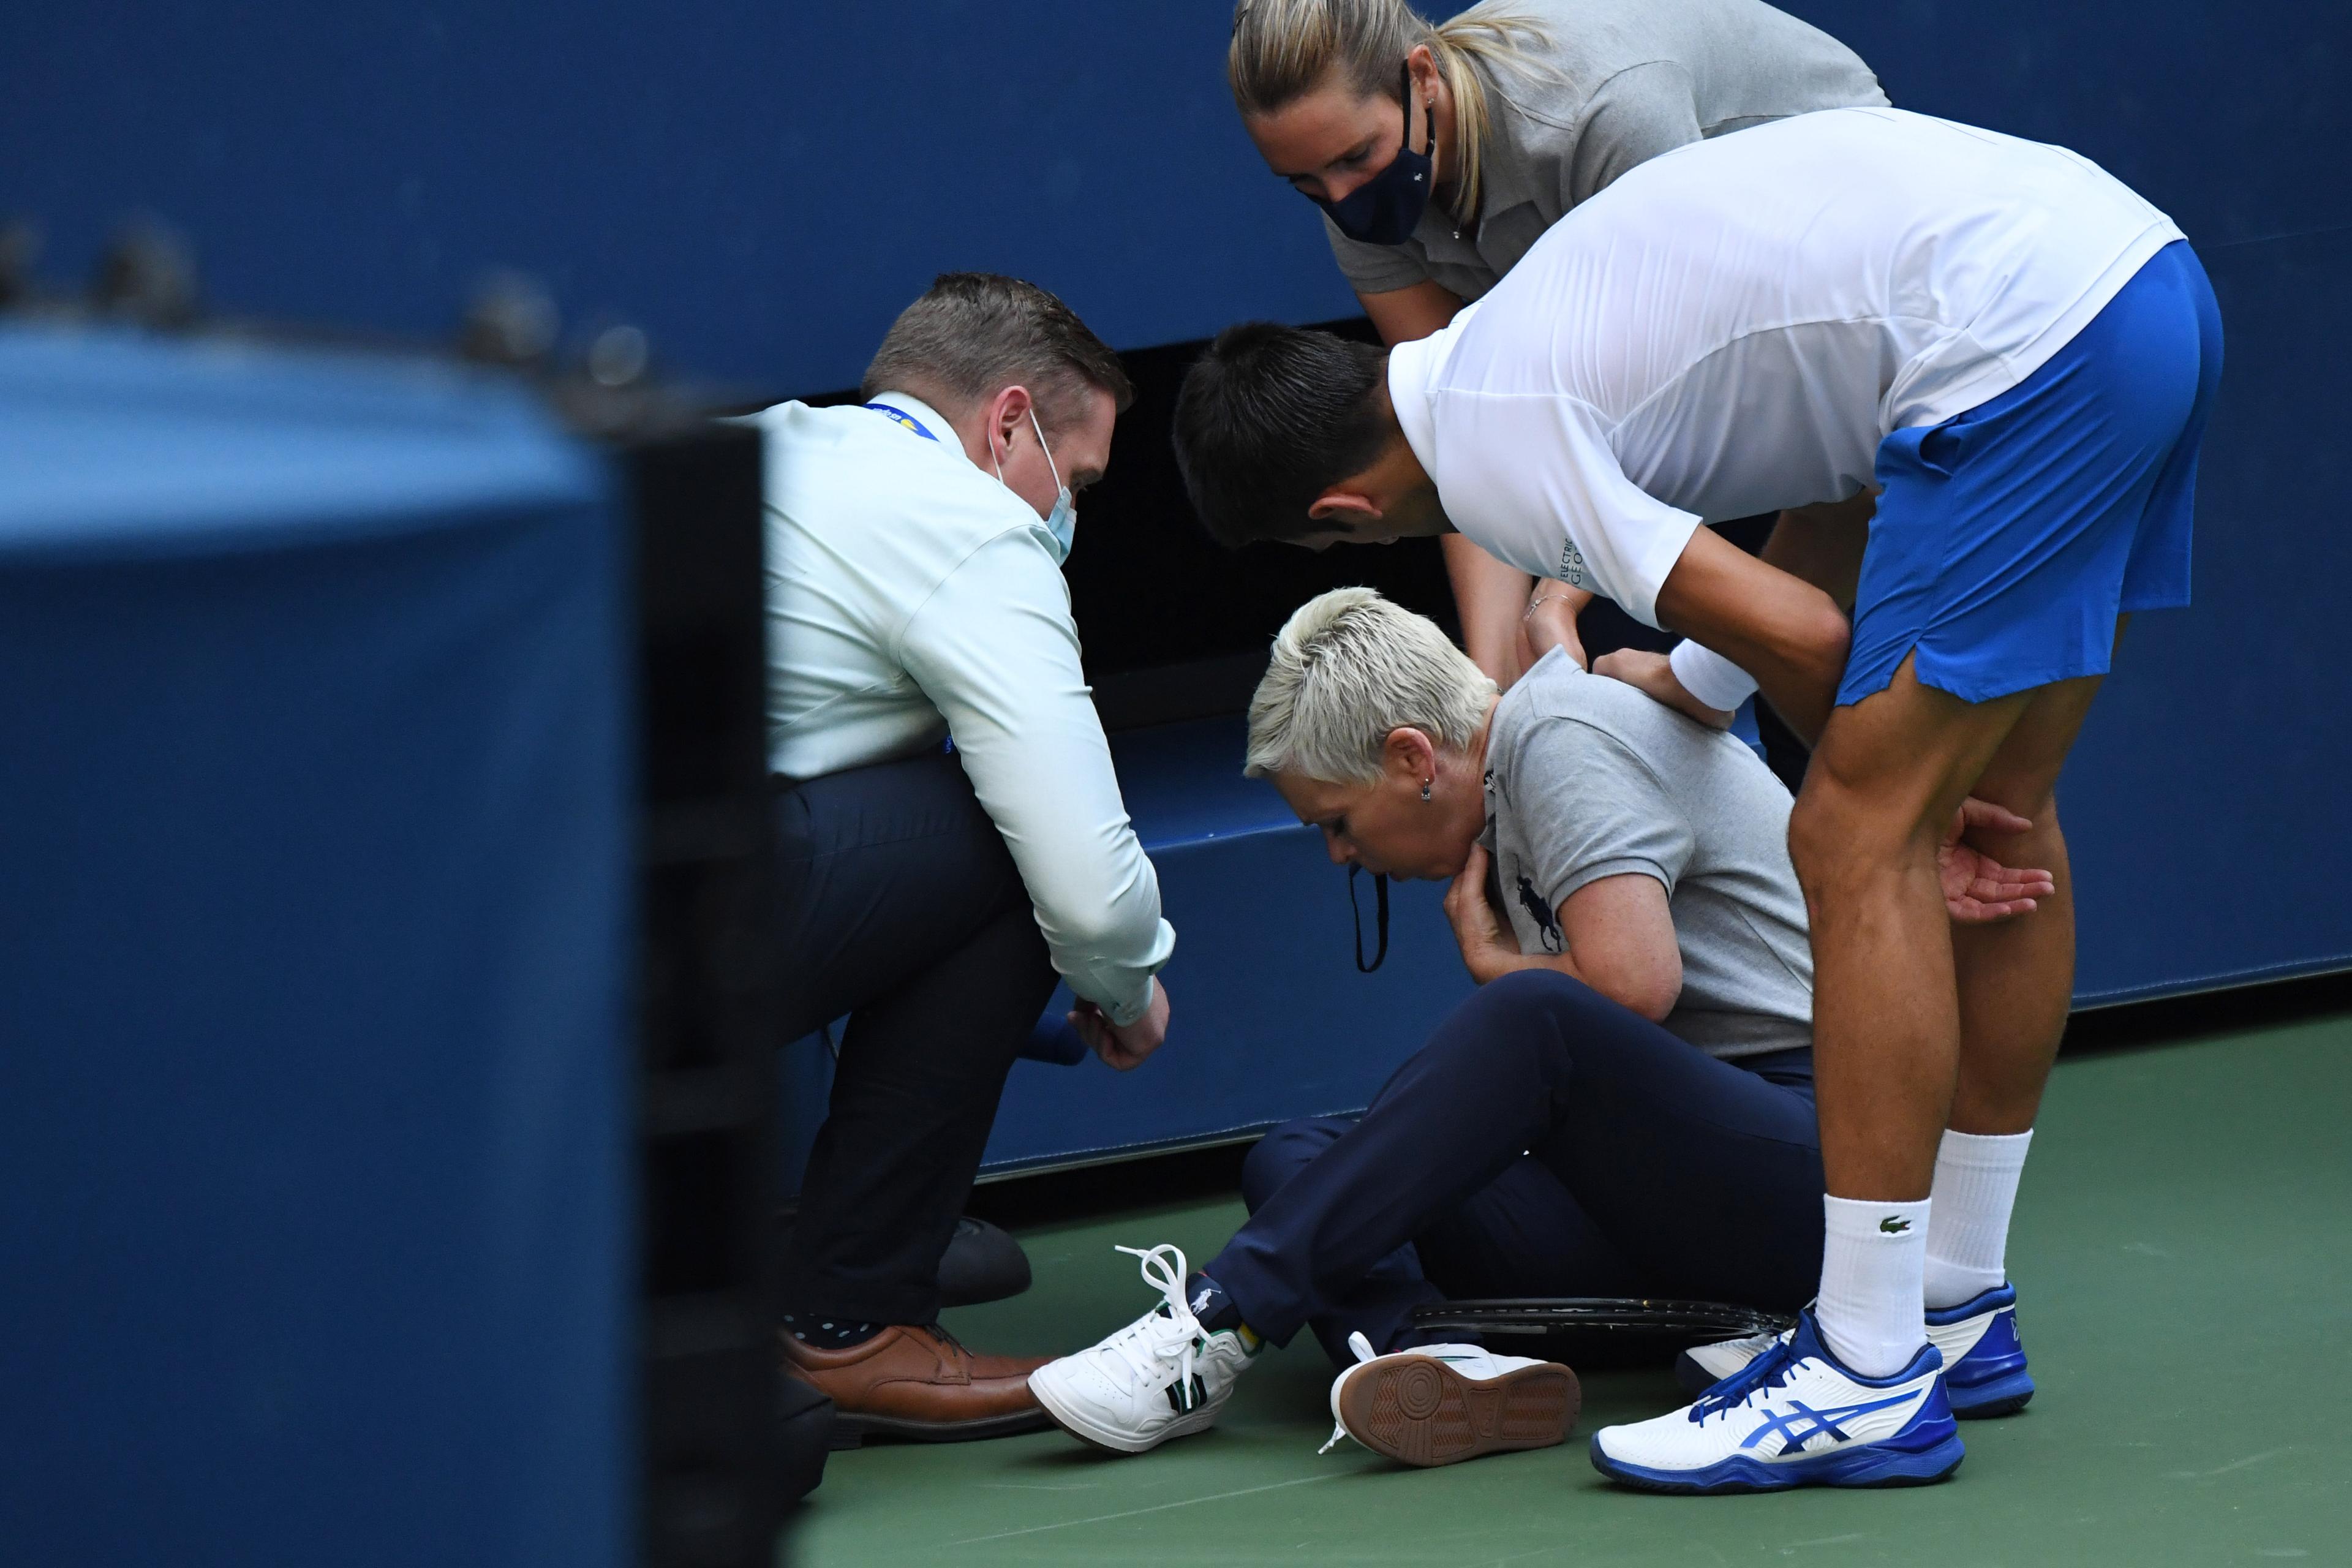 Sep 6, 2020; Flushing Meadows, New York, USA; Novak Djokovic of Serbia and a tournament official tend to a linesperson who was struck with a ball by Djokovic against Pablo Carreno Busta of Spain (not pictured) on day seven of the 2020 U.S. Open tennis tournament at USTA Billie Jean King National Tennis Center. Mandatory Credit: Danielle Parhizkaran-USA TODAY Sports / Danielle Parhizkaran-USA TODAY Sports